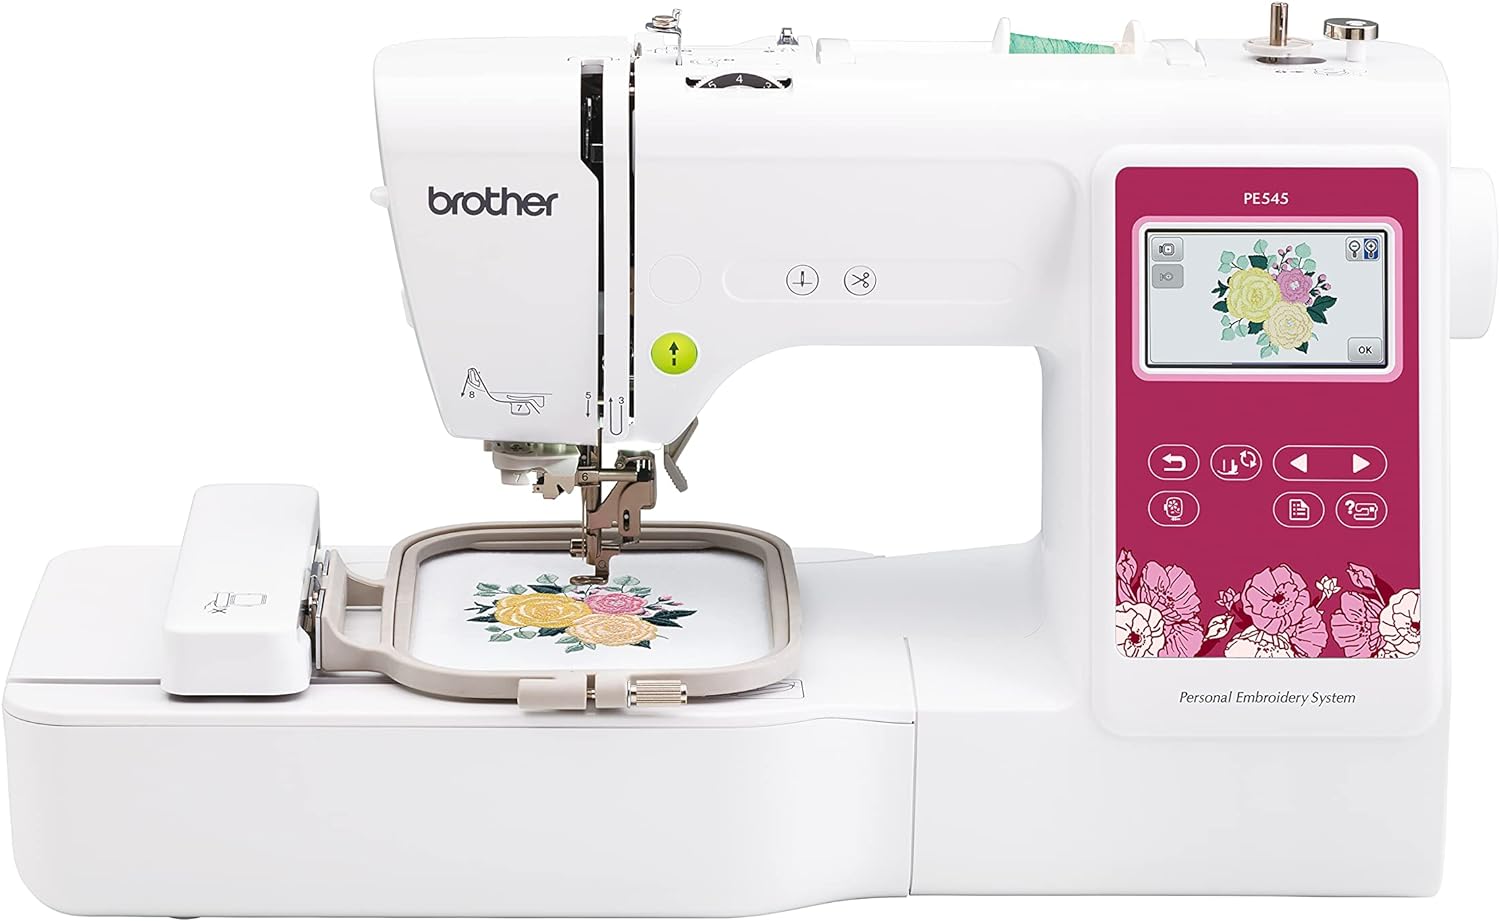 Brother PE545 Embroidery Machine Review